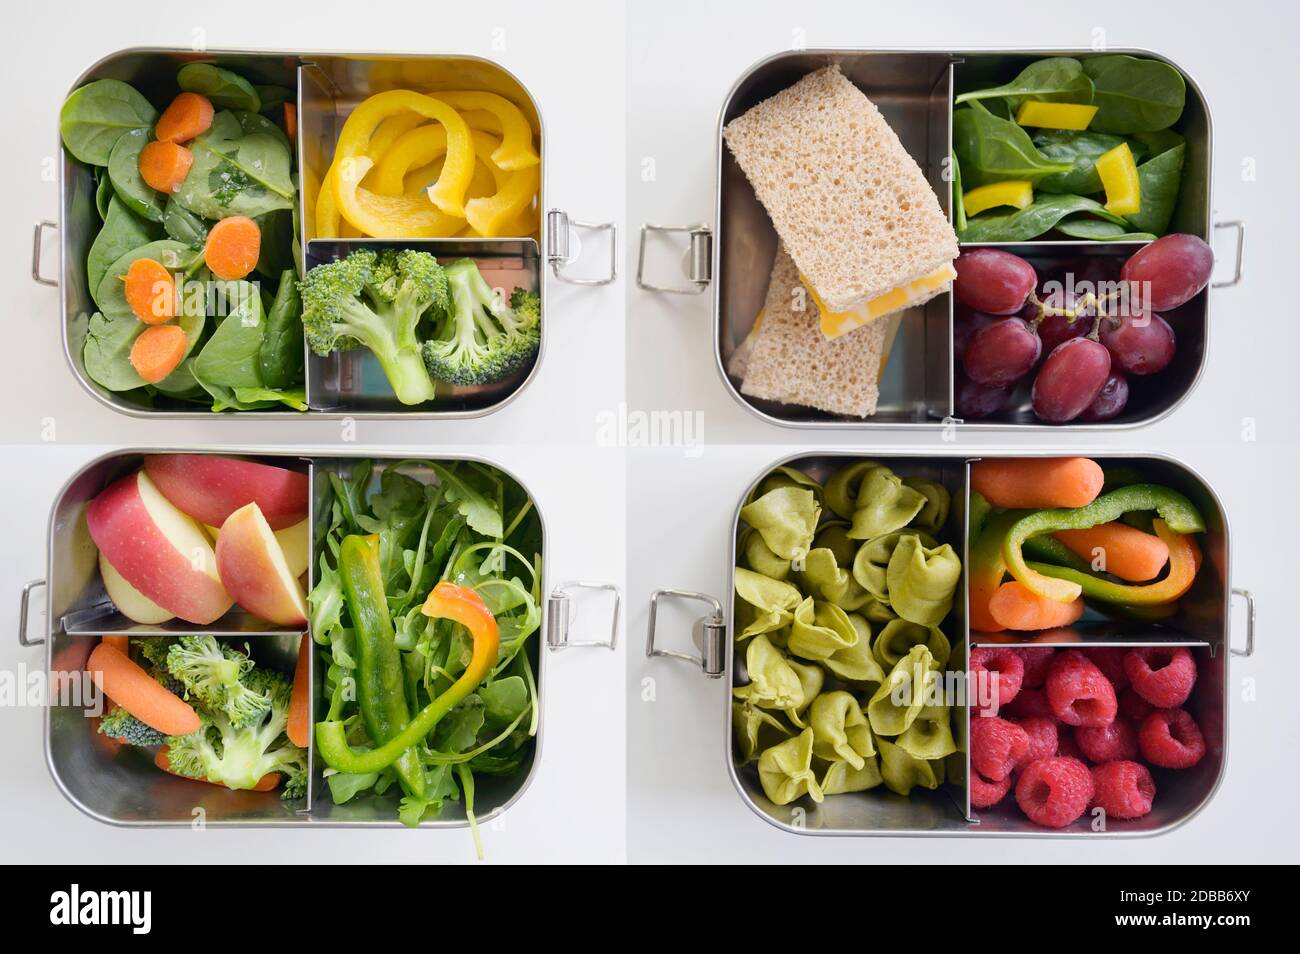 Lunch boxes with fresh vegetables and fruits Stock Photo